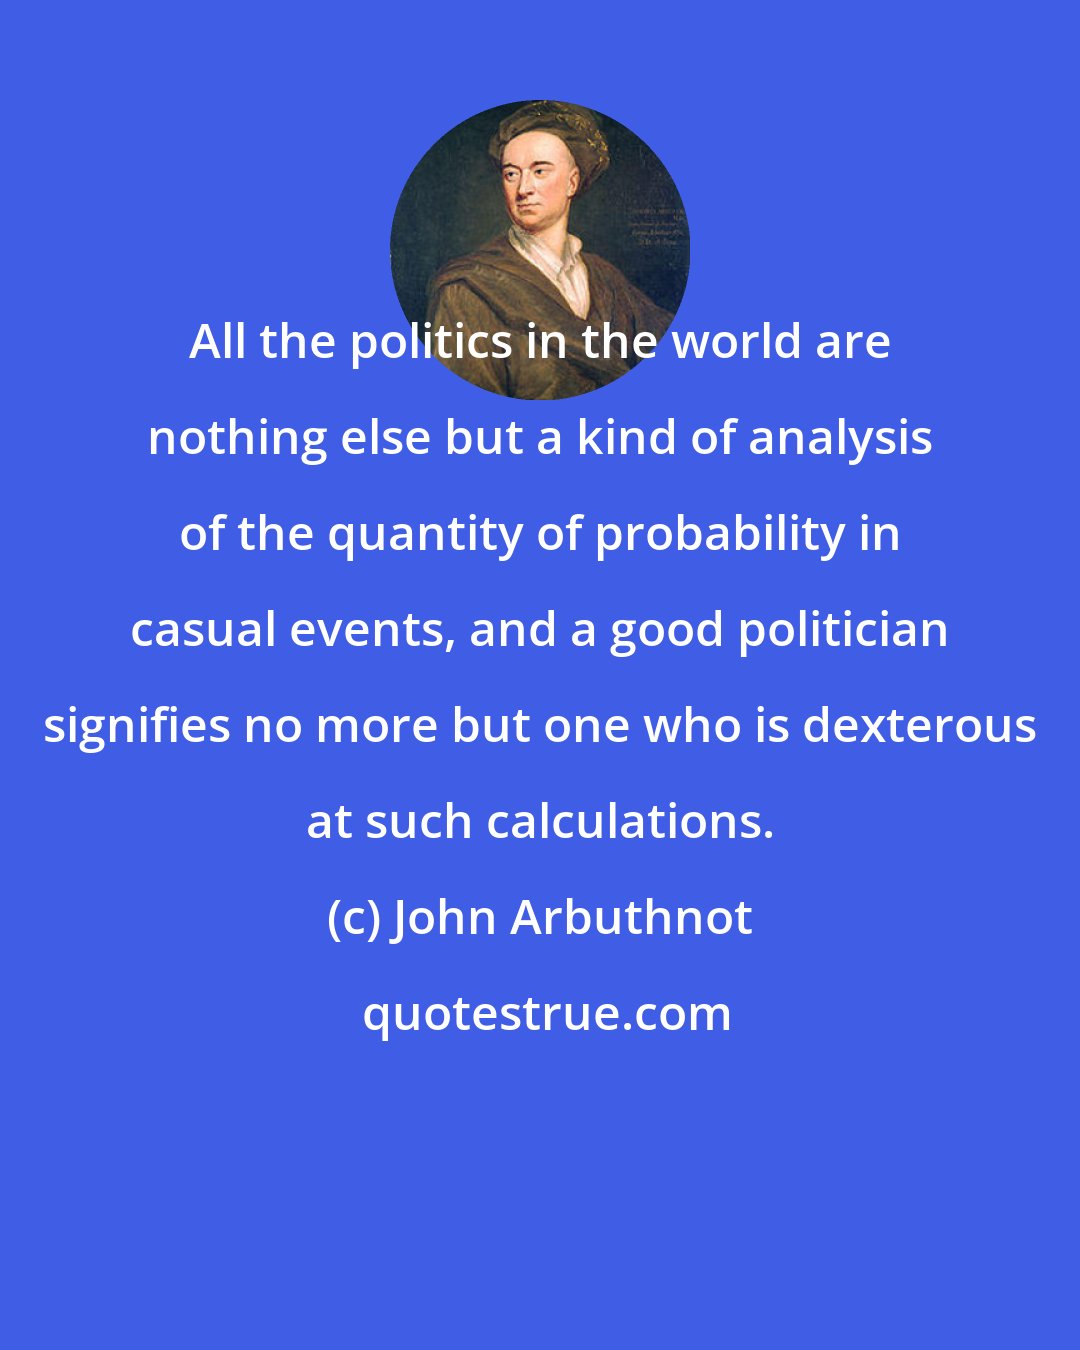 John Arbuthnot: All the politics in the world are nothing else but a kind of analysis of the quantity of probability in casual events, and a good politician signifies no more but one who is dexterous at such calculations.